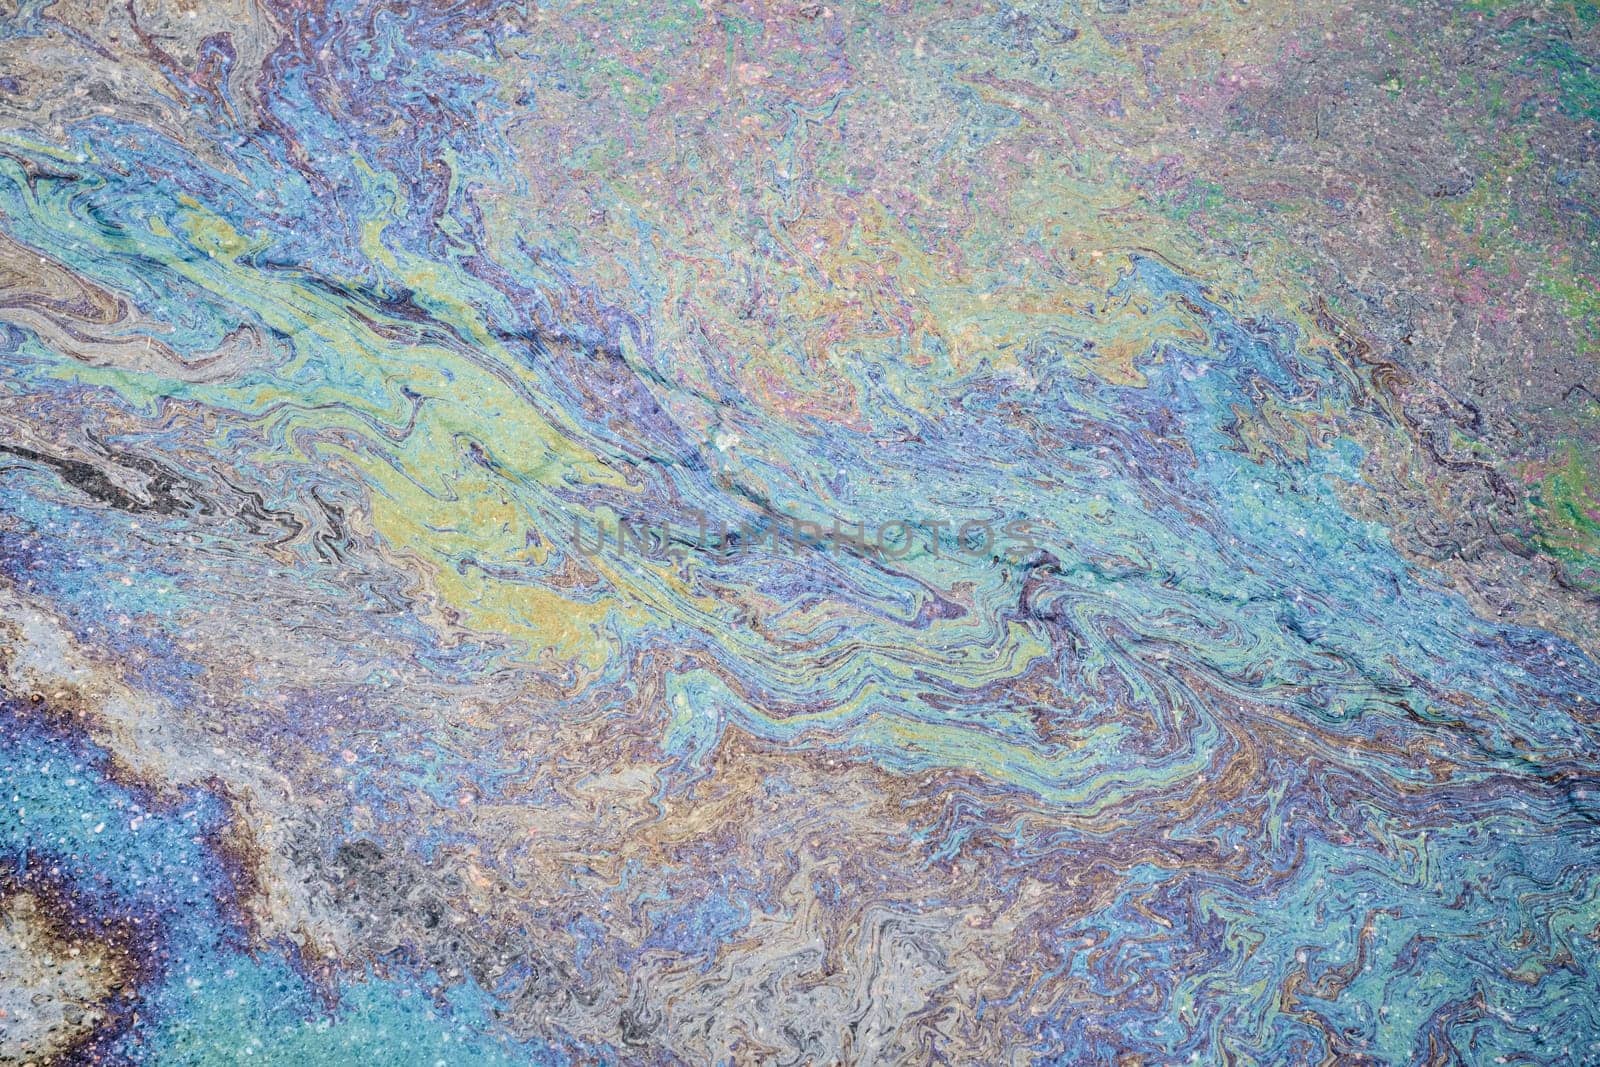 Colorful petrol oil spill creating a textured surface on the wet pavement.